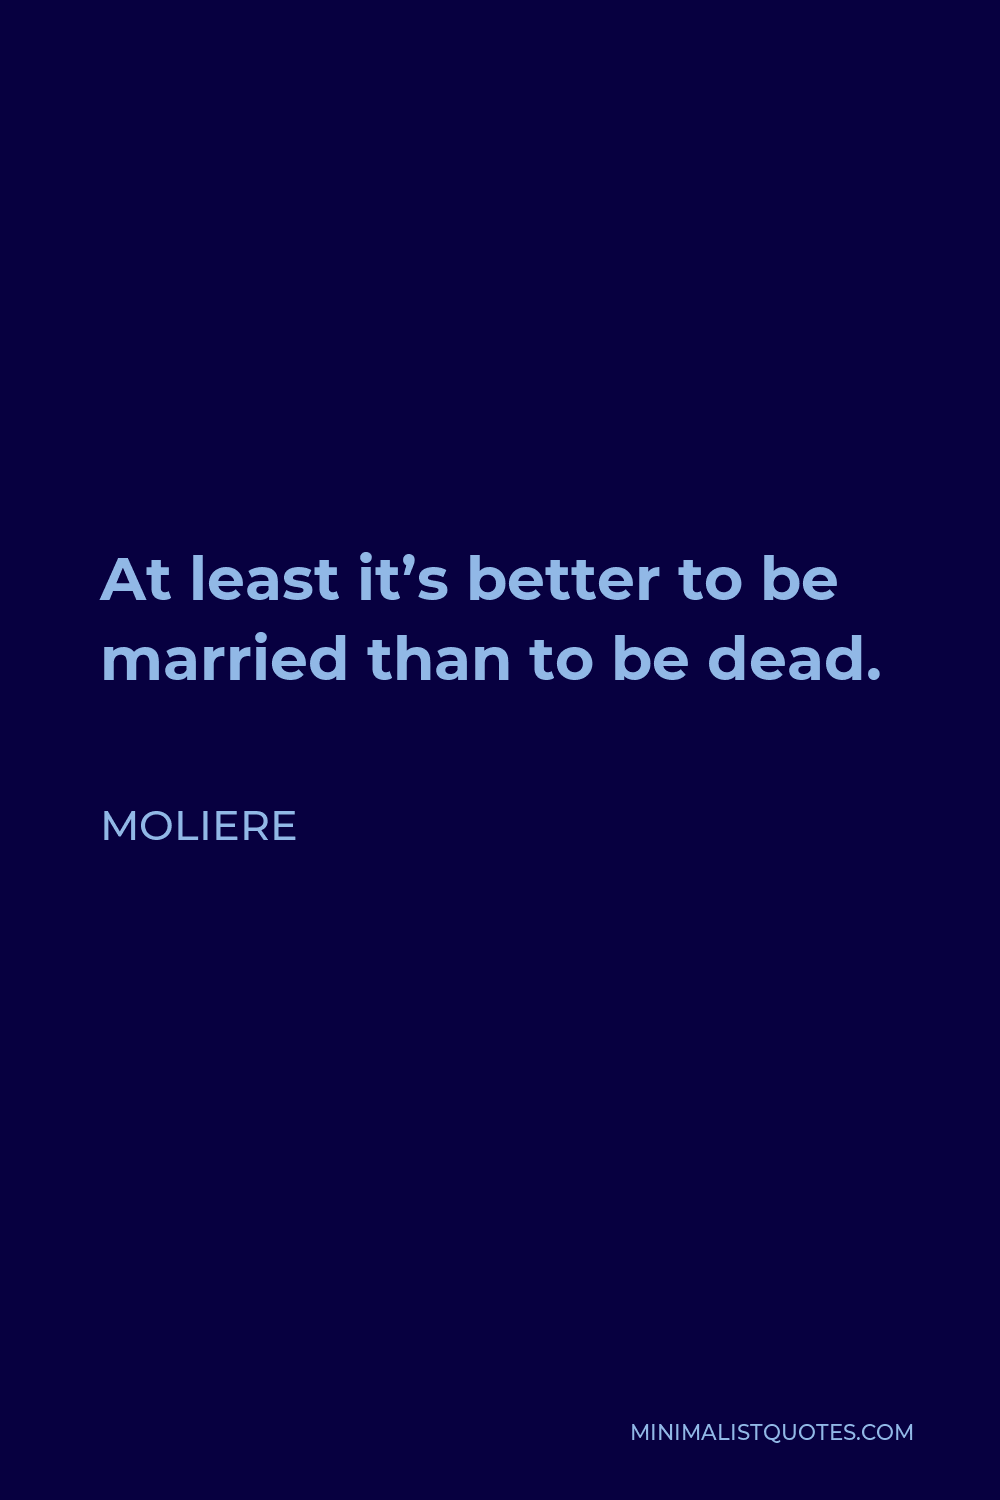 Moliere Quote - At least it’s better to be married than to be dead.